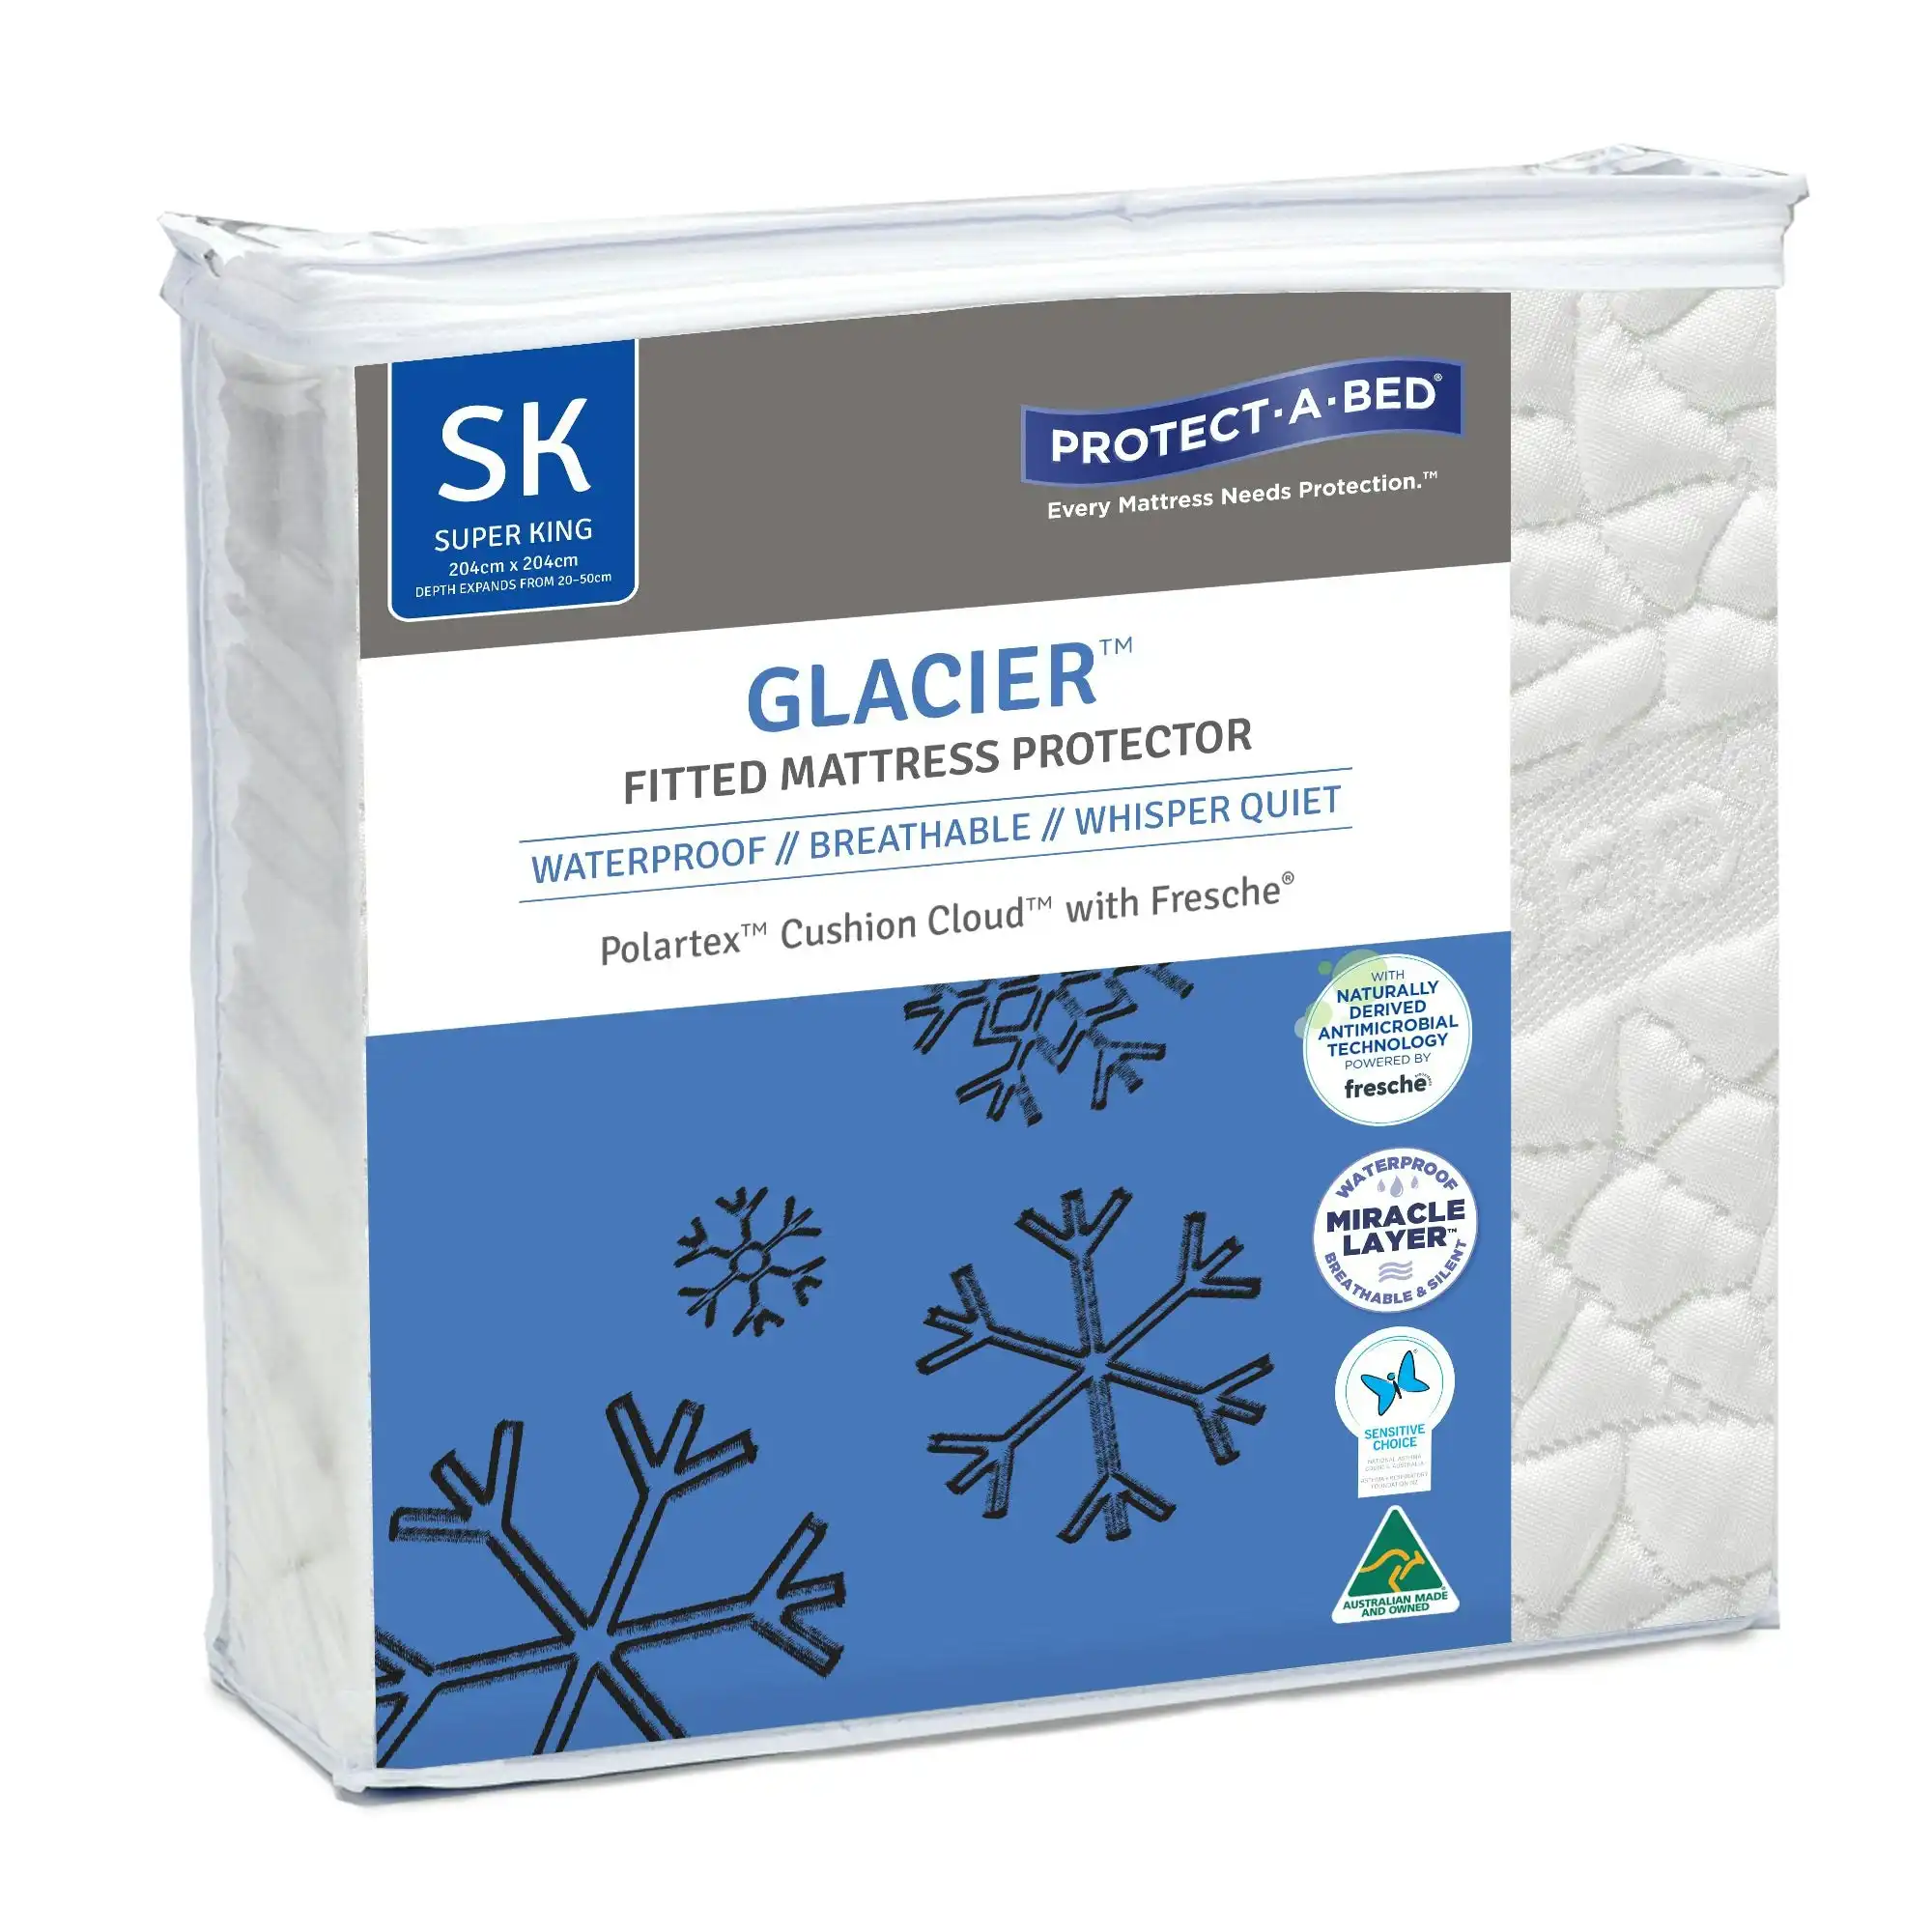 Protect A Bed Glacier Polartex Jacquard Fitted Waterproof Mattress & Pillow Protectors  ON SALE